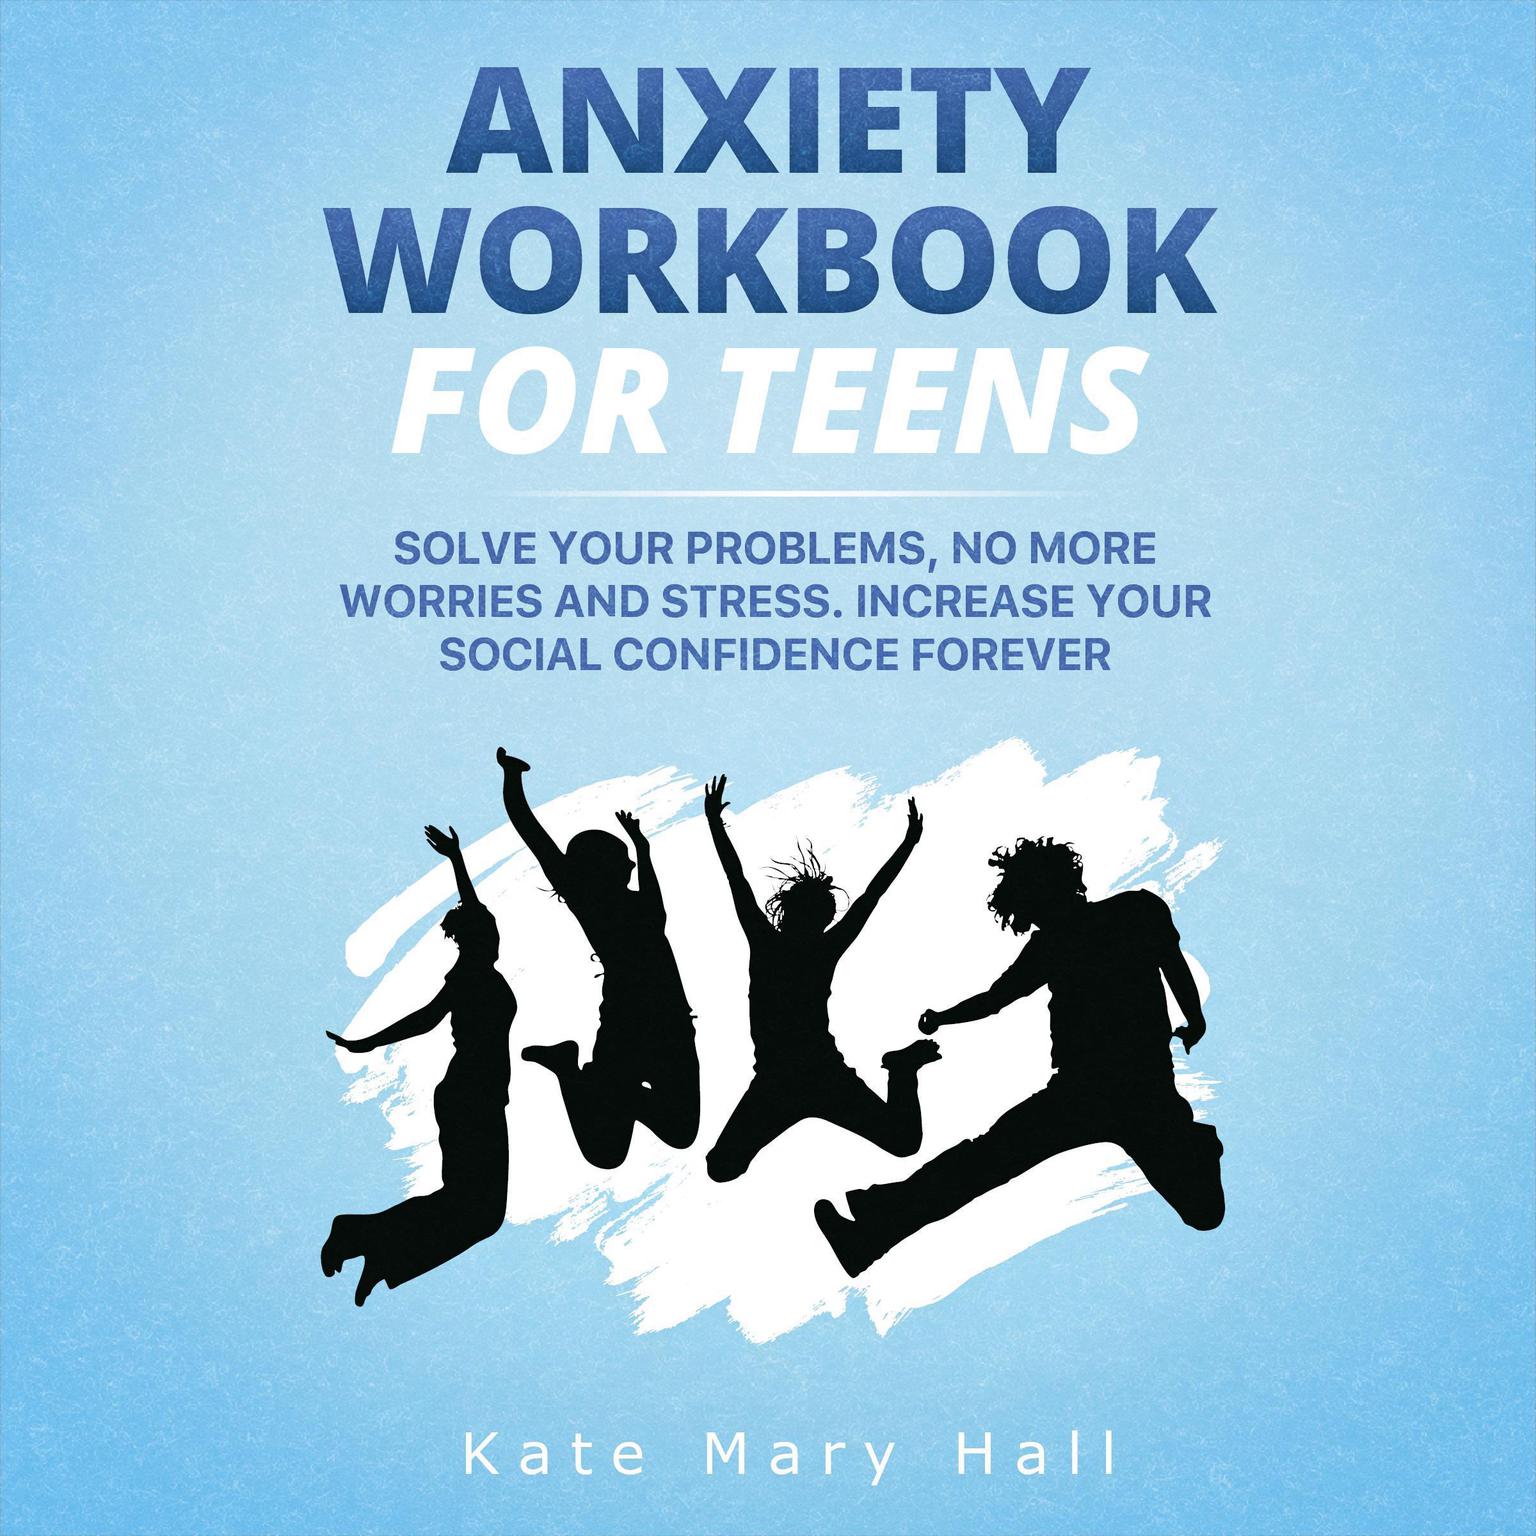 Anxiety Workbook for Teens: Solve Your Problems, no More Worries and Stress. Increase Your Social Confidence Forever Audiobook, by Kate Mary Hall